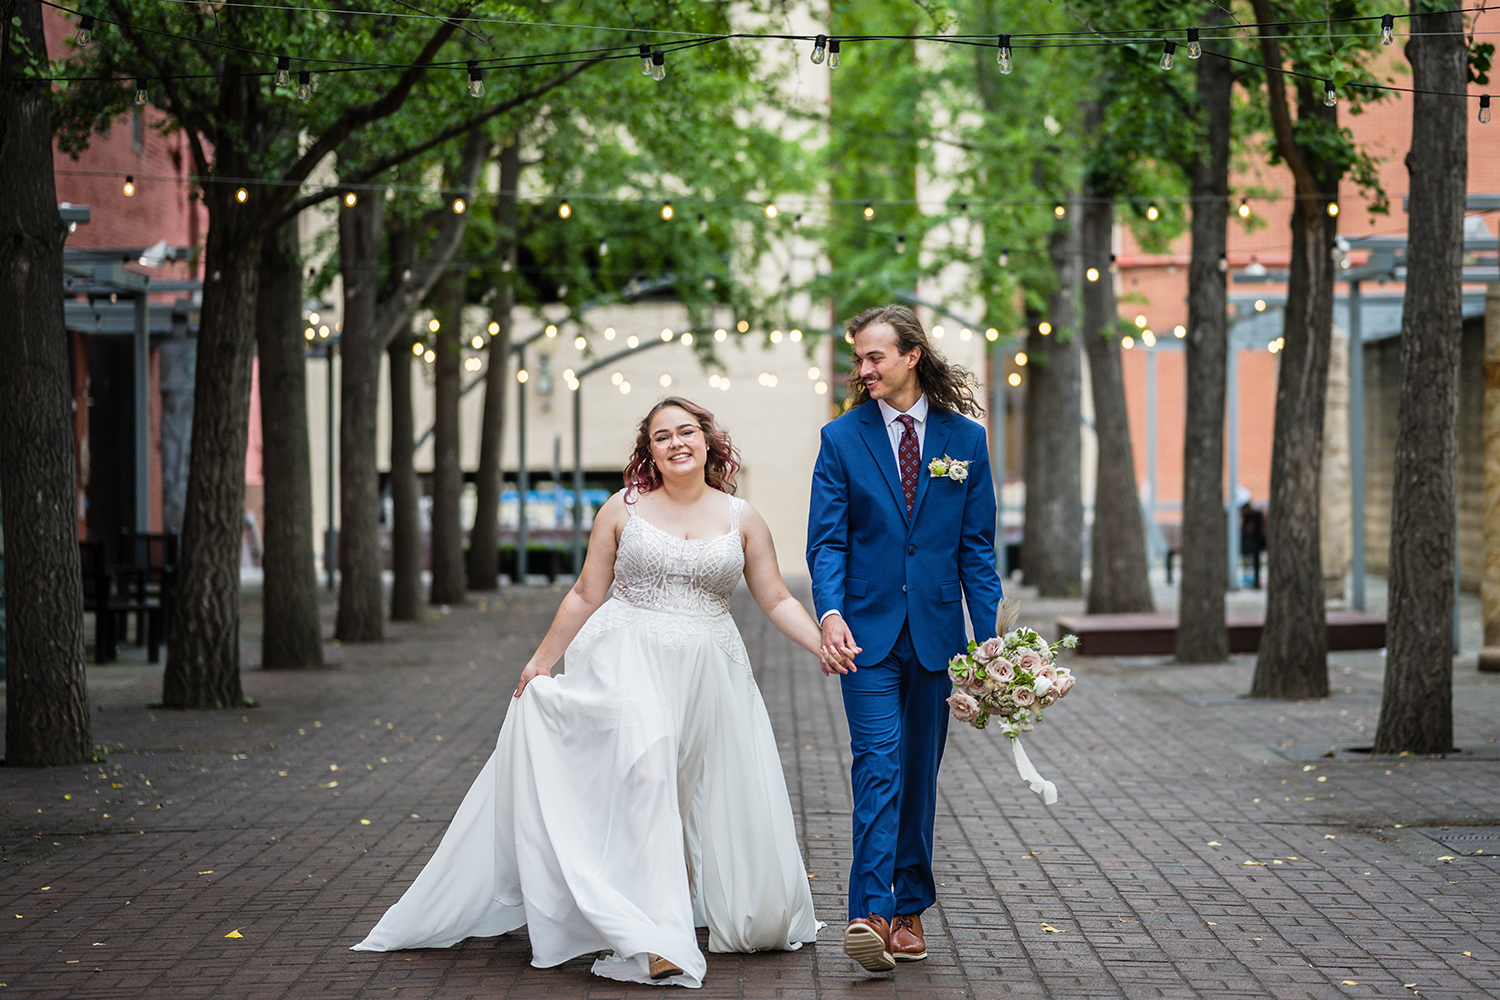 A couple walk hand-in-hand following their ceremony in Downtown Roanoke with smiles on their faces during their elopement day.